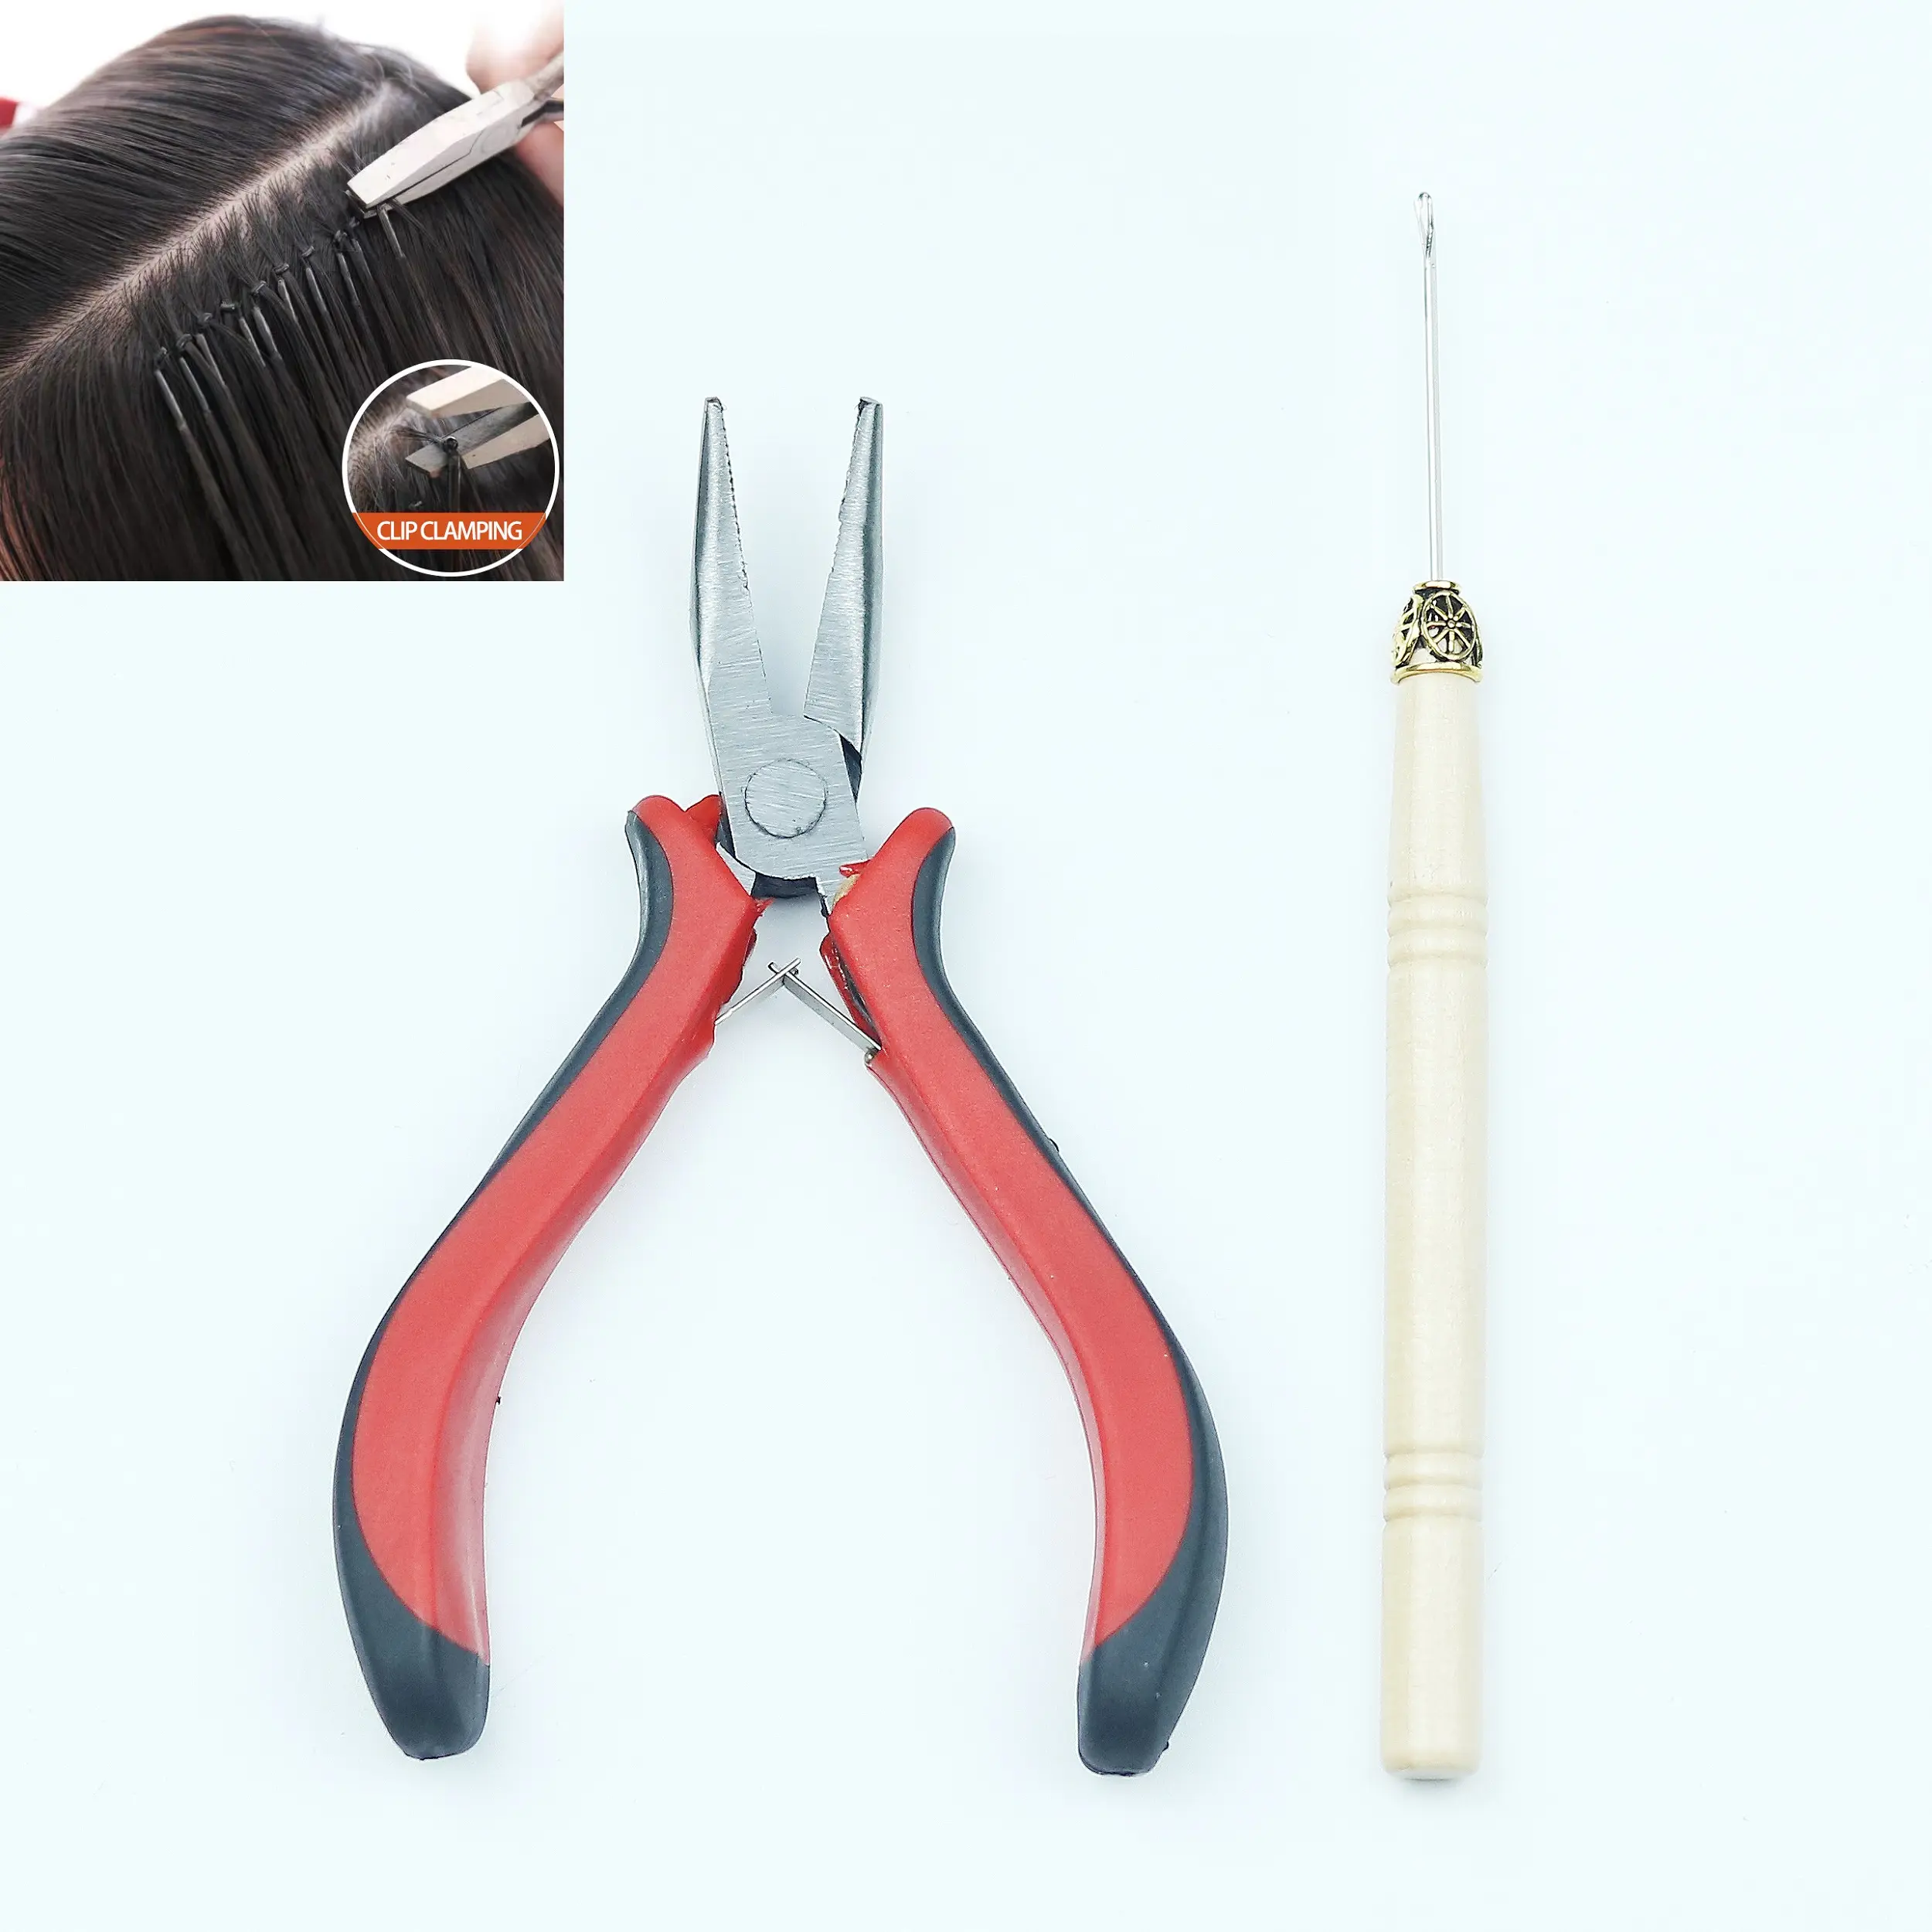 Elbow pliers DIY hair extension tool clamp, suitable for micro ring/link/bead and extension